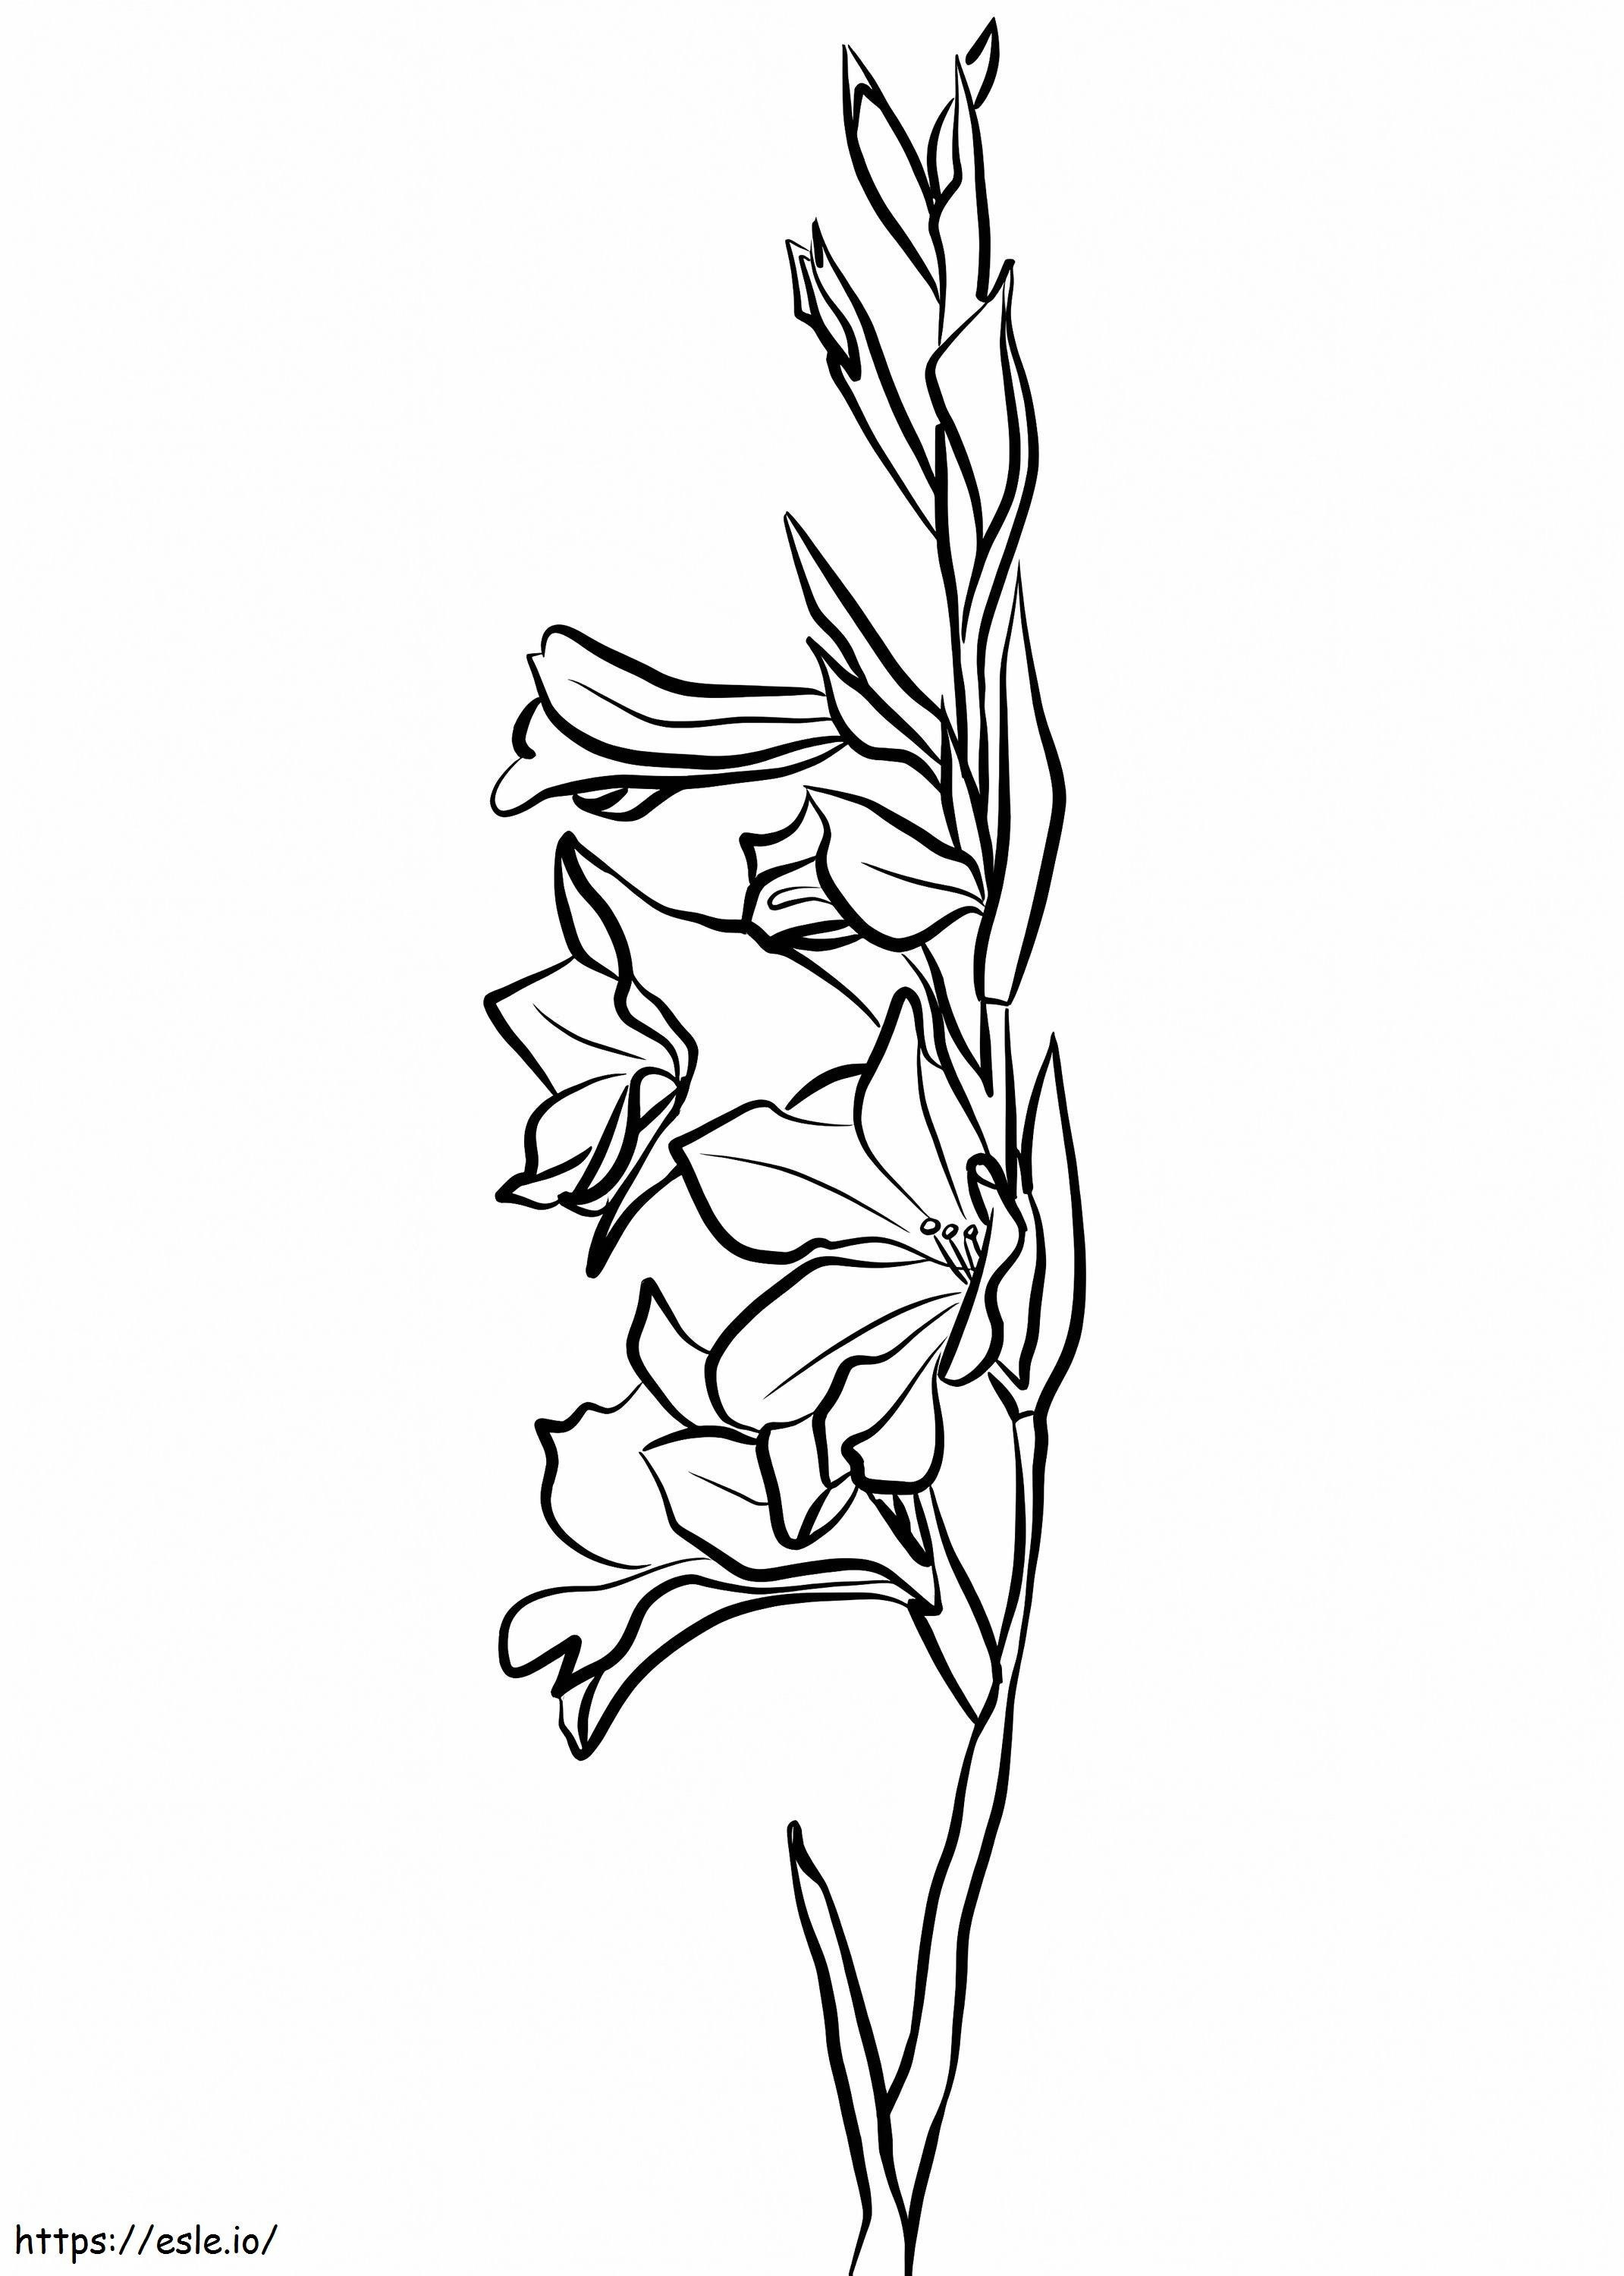 Gladiolus Flowers coloring page